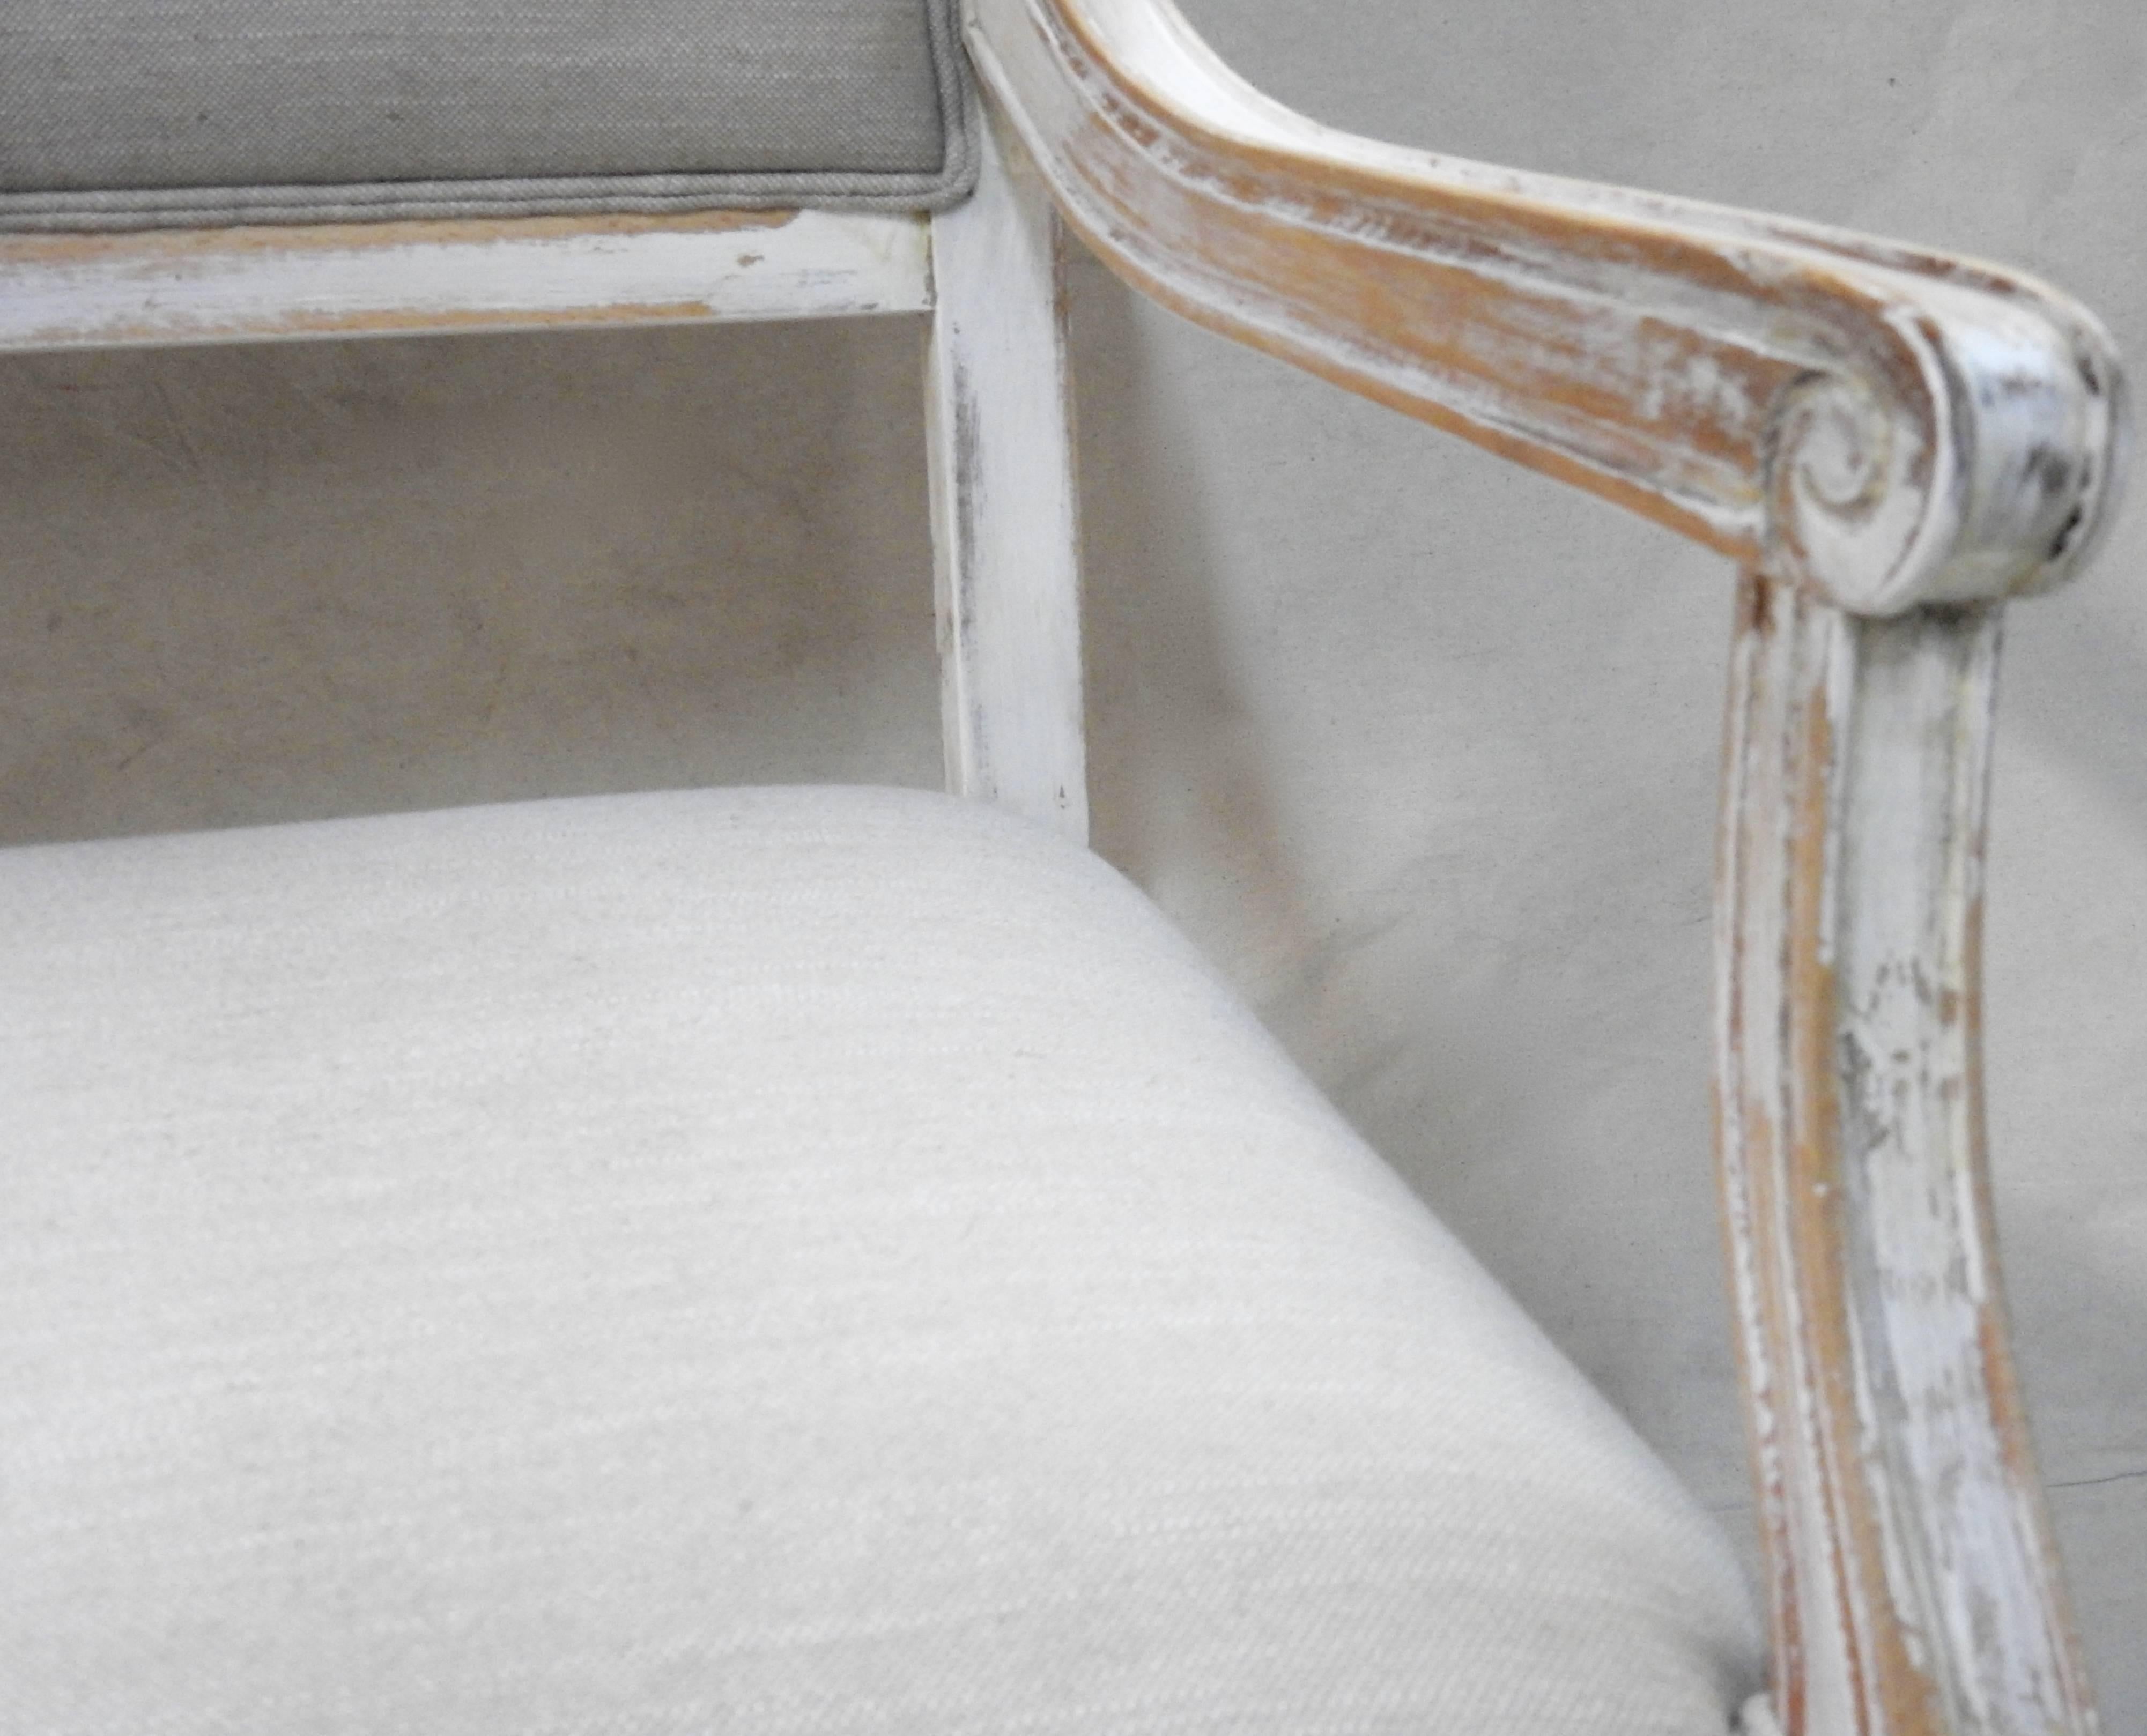 We are offering a superb Louis XVI style hall bench settee. It has a painted and distressed finish, featuring disrupted white and lead white colors with some of the wood showing through. The angular framed back and tight seat are upholstered in a